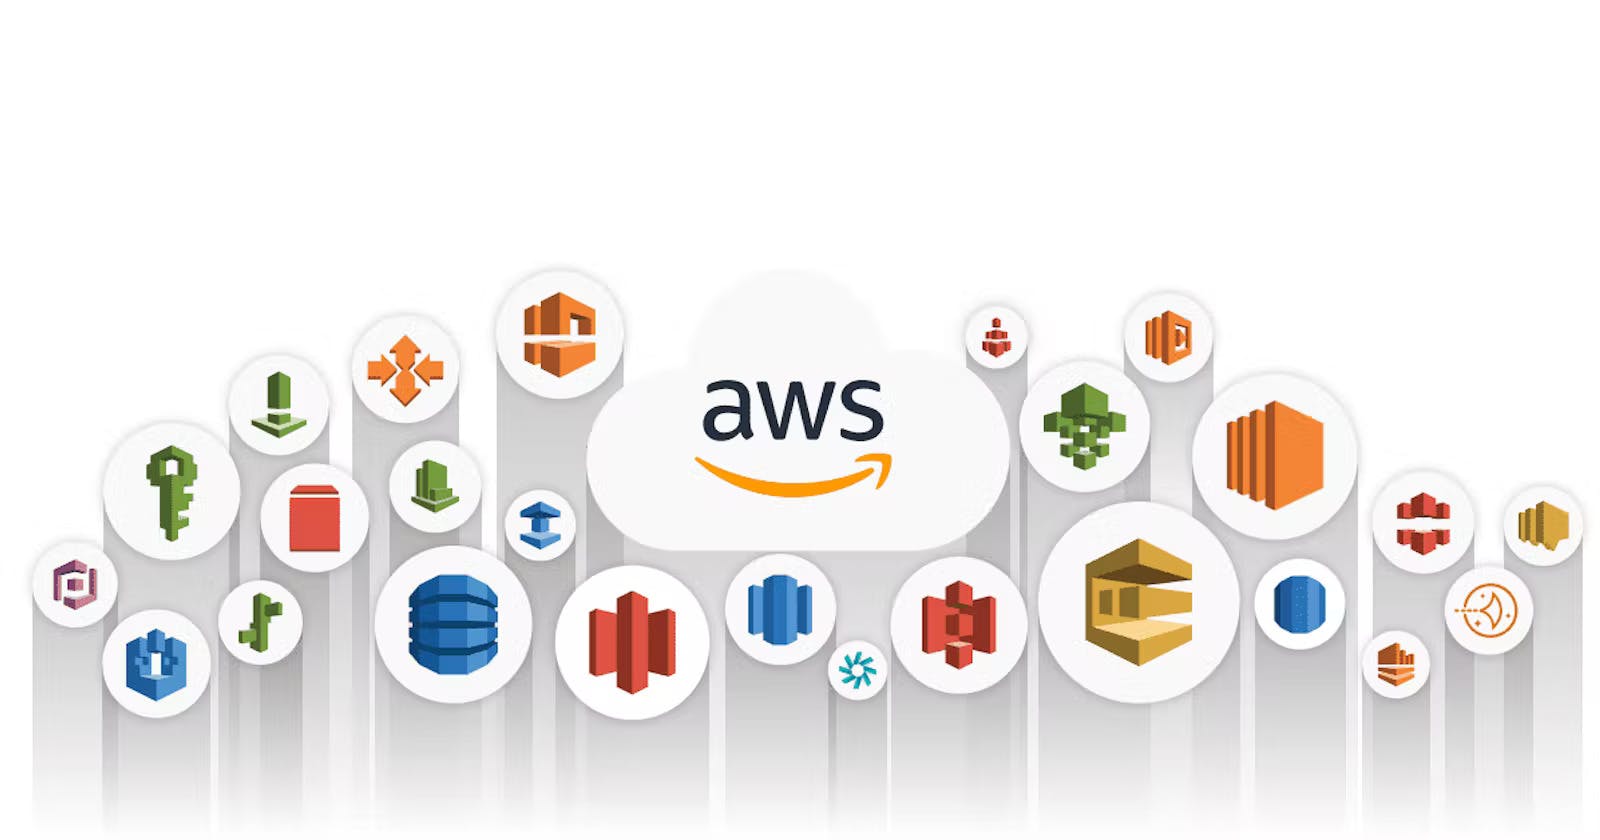 AWS in a nutshell!!!